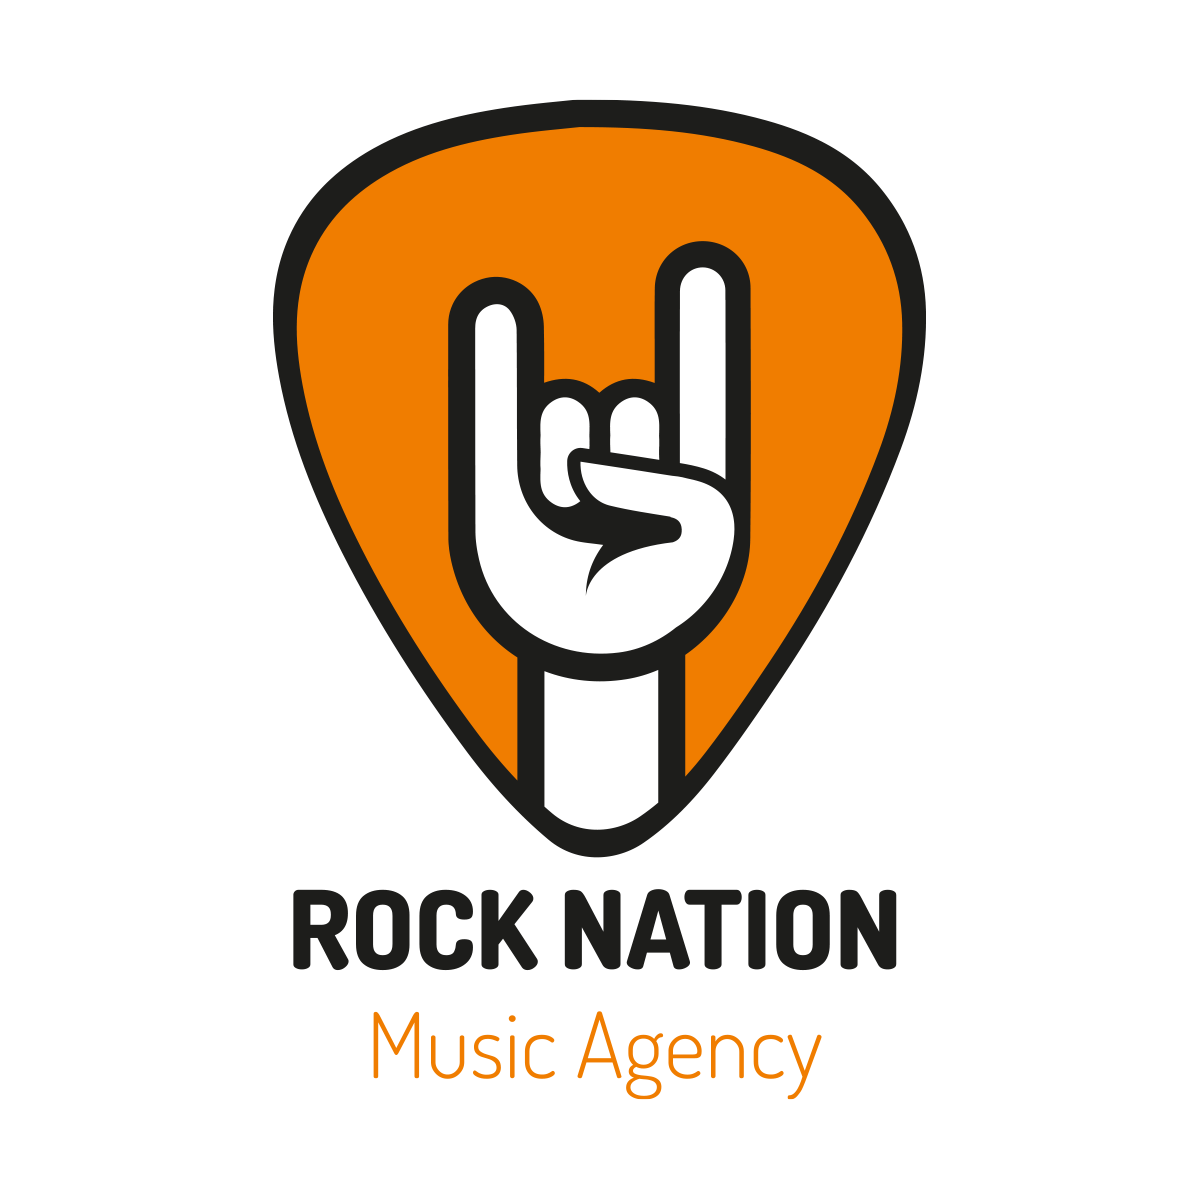 Rock Nation Music Agency